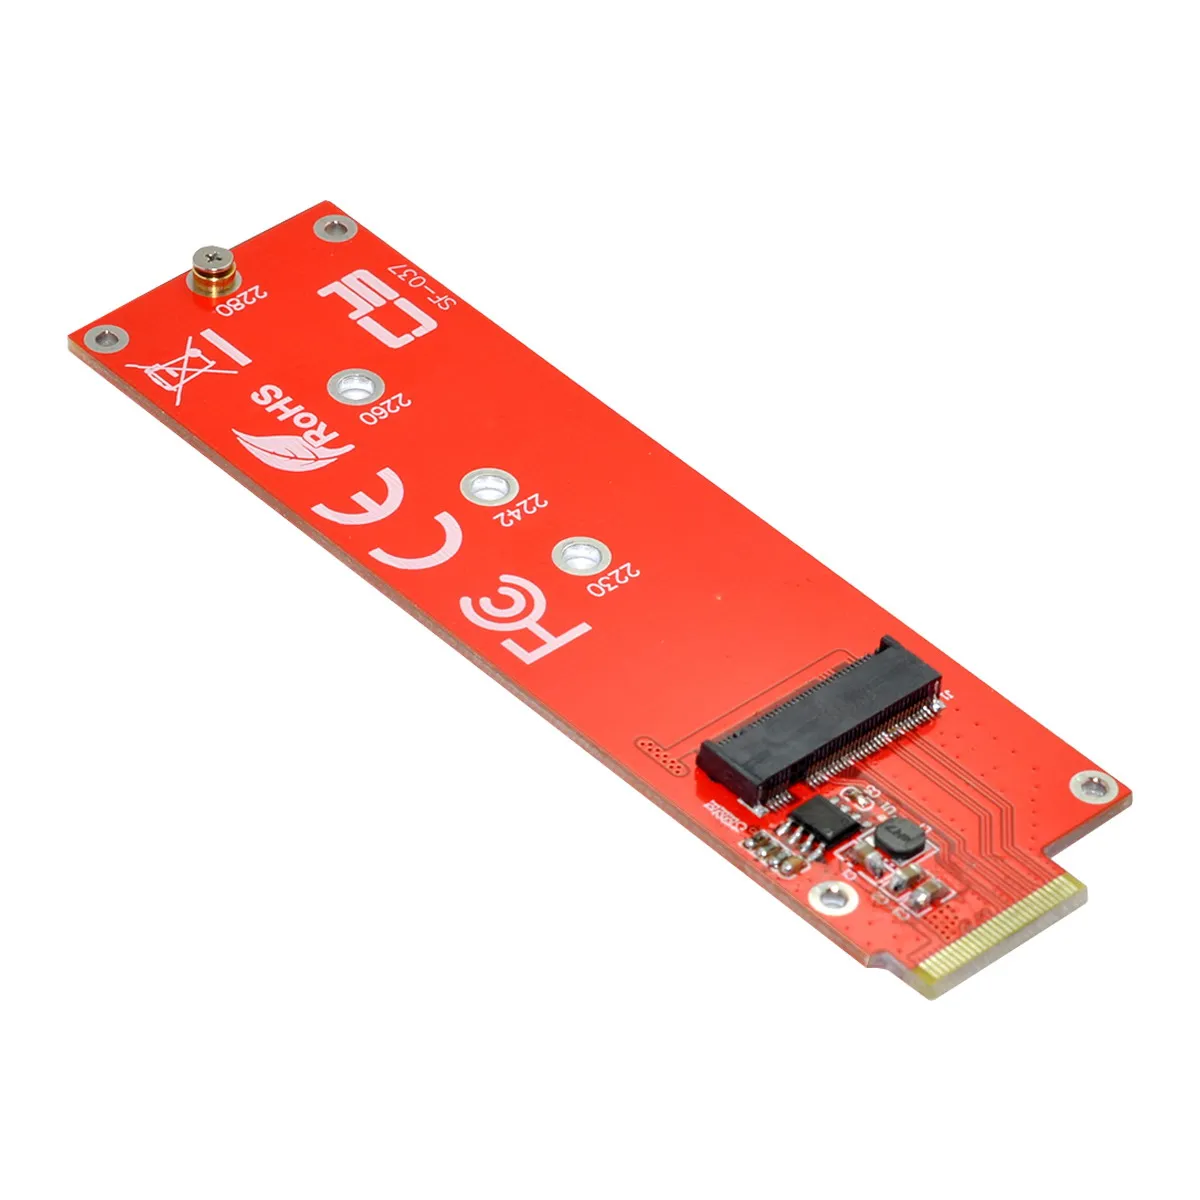 

Cablecc NVMe NGFF M-key 4X Host Adapter to Ruler 1U GEN-Z EDSFF Short SSD E1.S Carrier Adapter